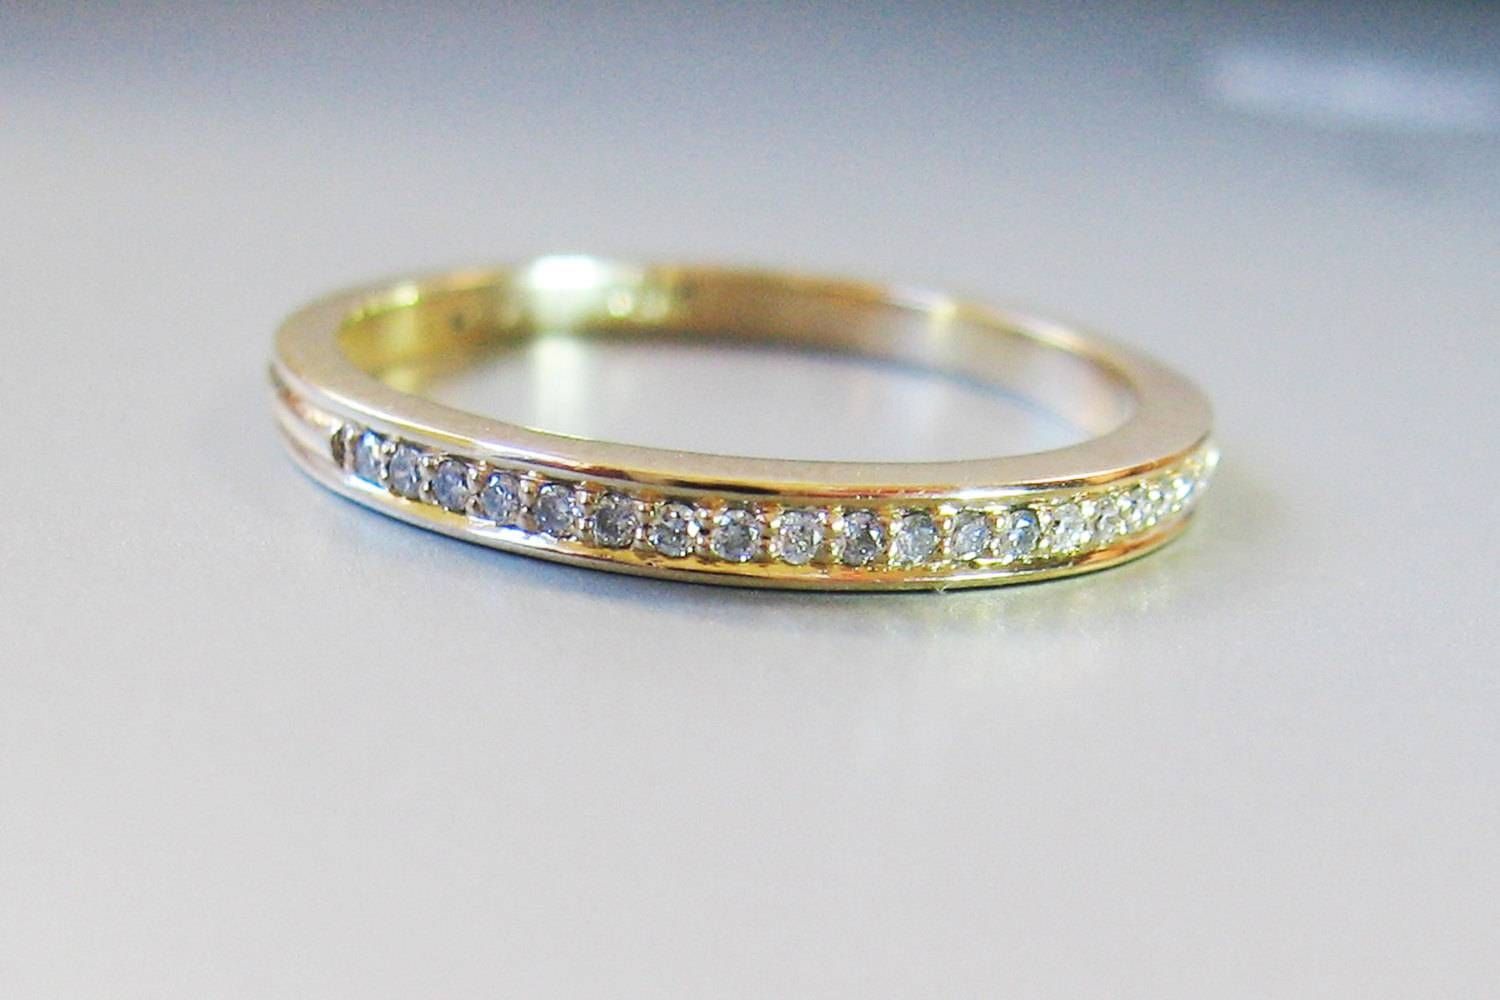 Micro Pave Diamond Eternity Ring 2mm In 14k Gold, Handmade Diamond Throughout Handmade Gold Engagement Rings (View 8 of 15)